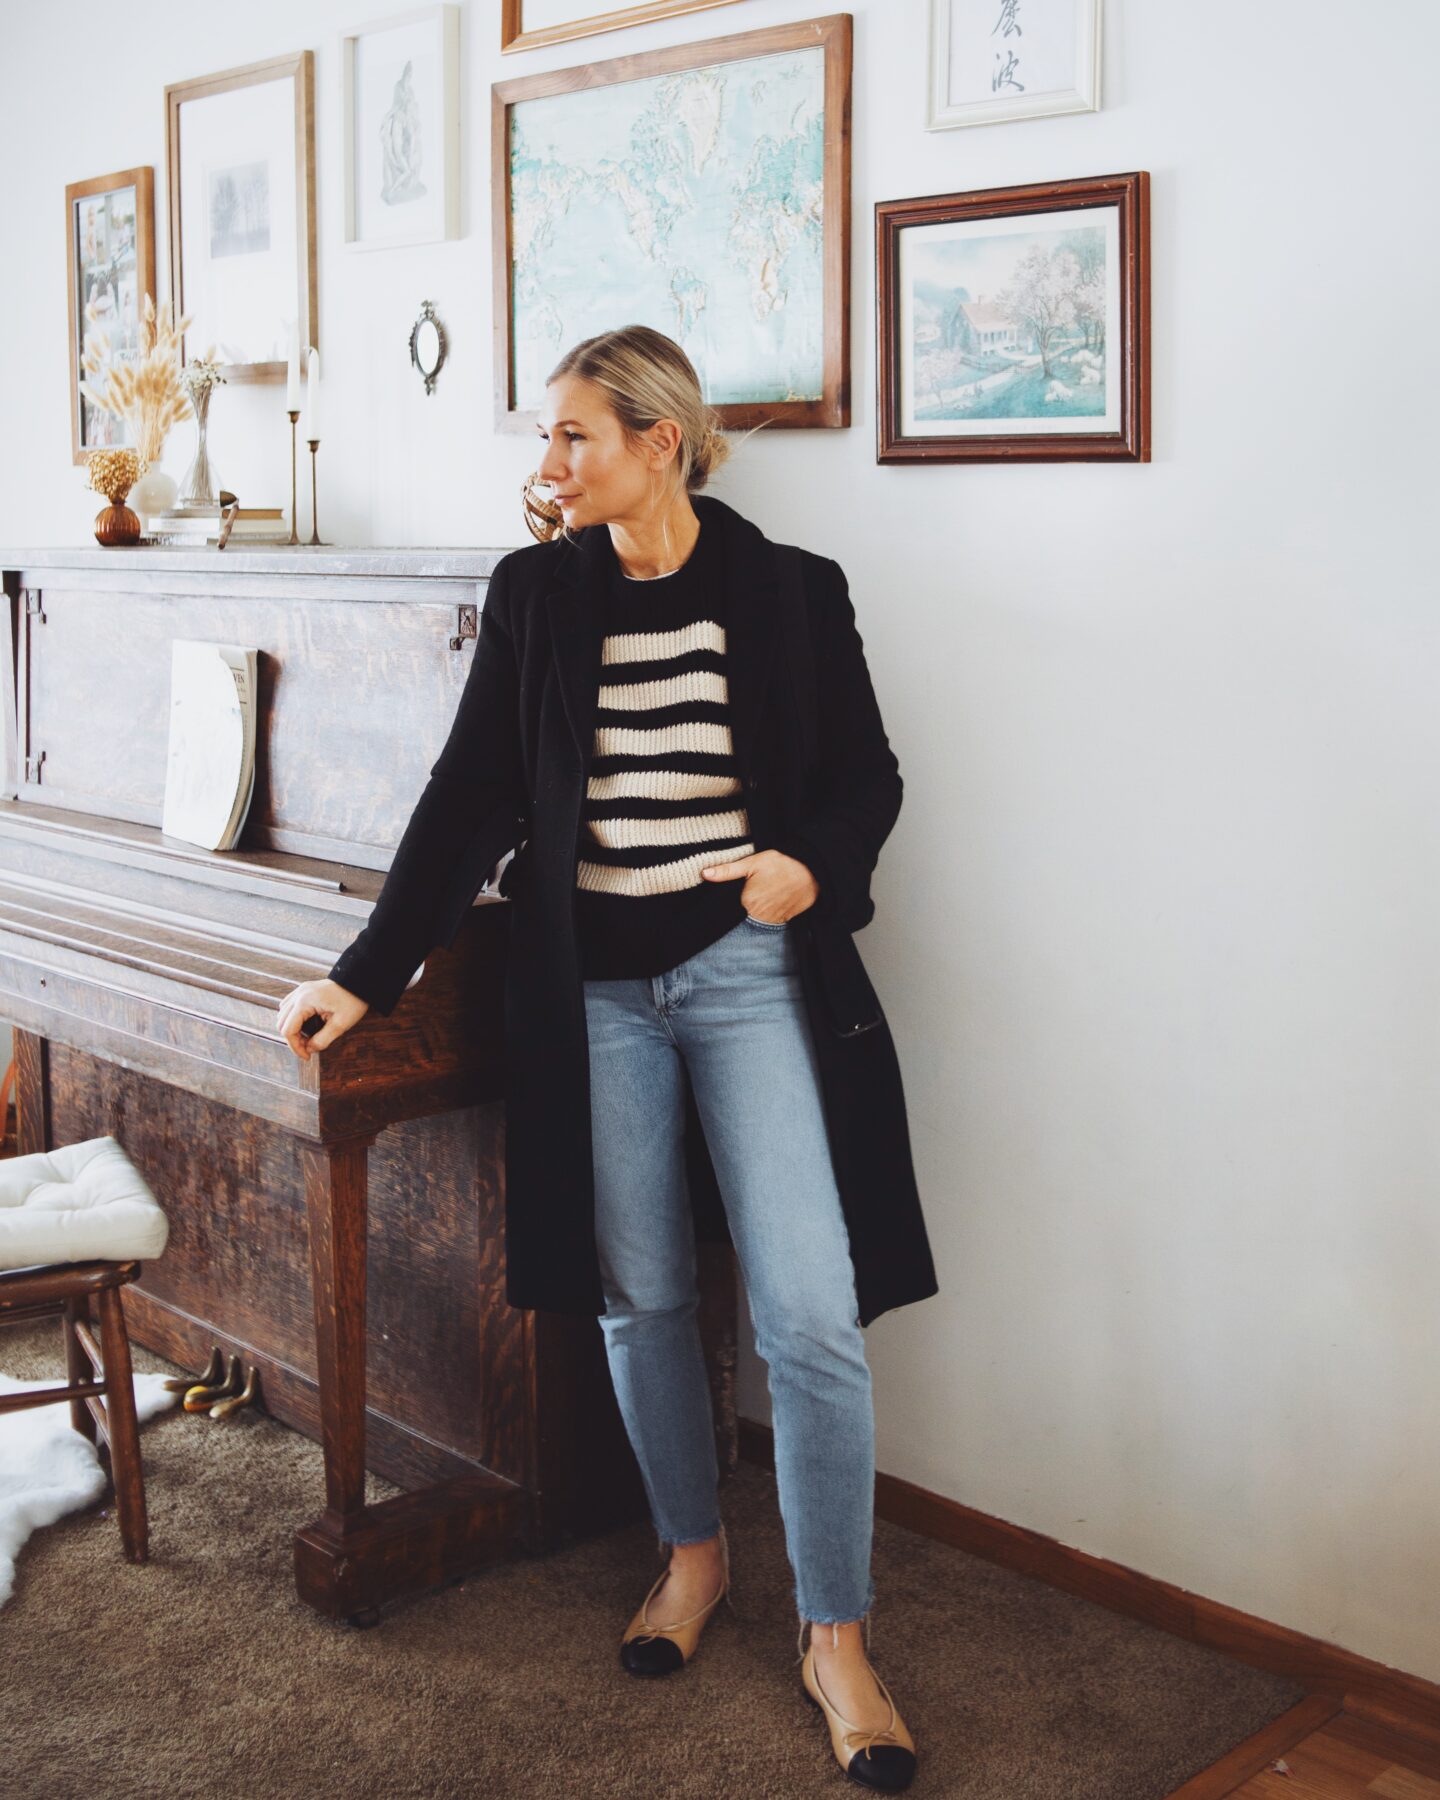 Karin Emily wears a Breton stripe cashmere sweater, Agolde jeans, a black wool belted coat, and Chanel inspired cap toe flats